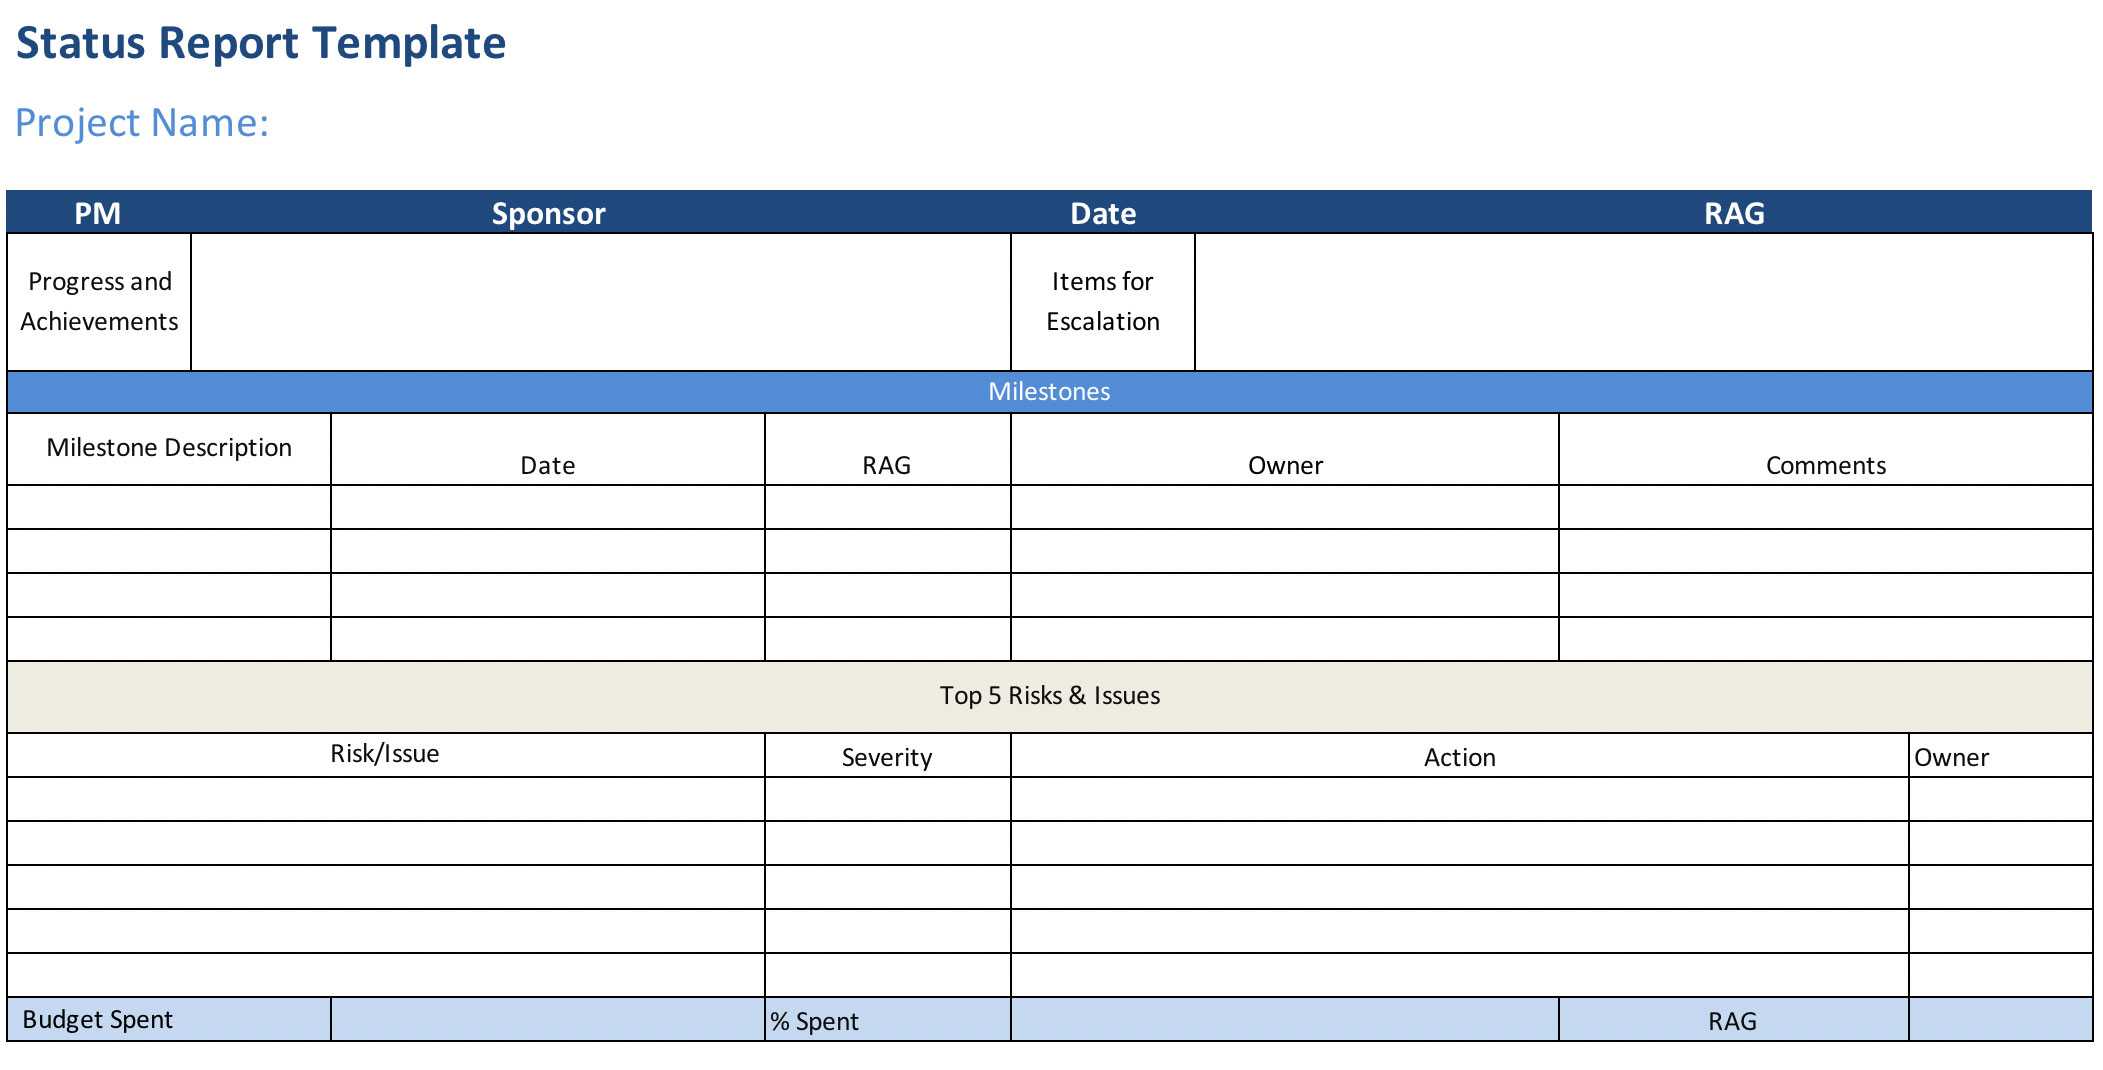 Project Status Report (Free Excel Template) – Projectmanager With Daily Status Report Template Software Development